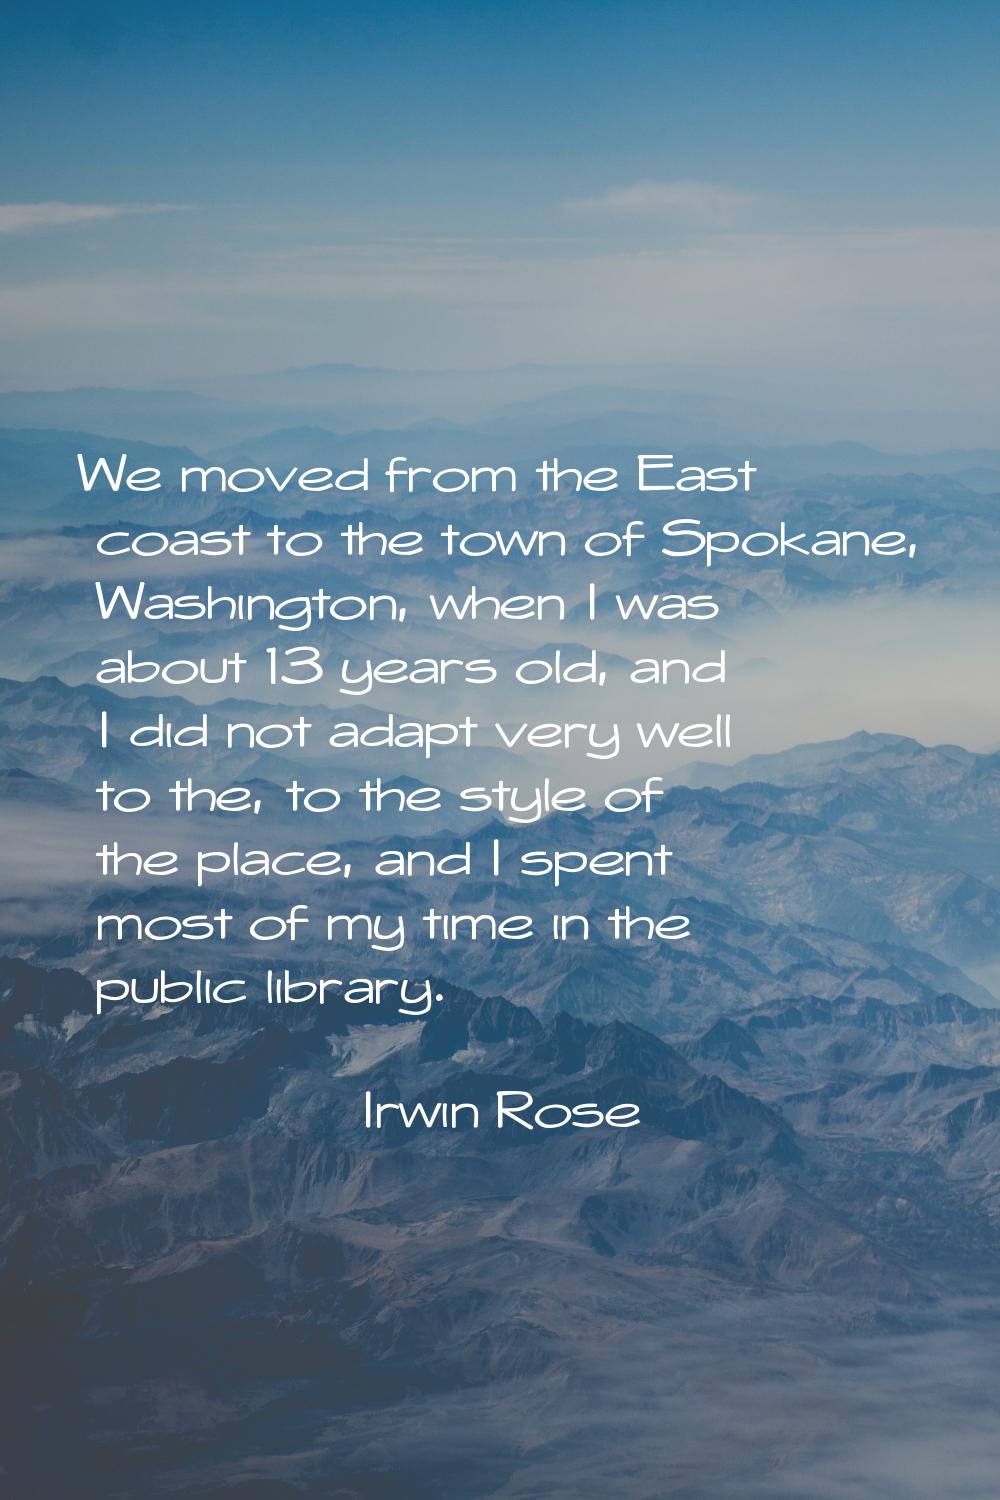 We moved from the East coast to the town of Spokane, Washington, when I was about 13 years old, and